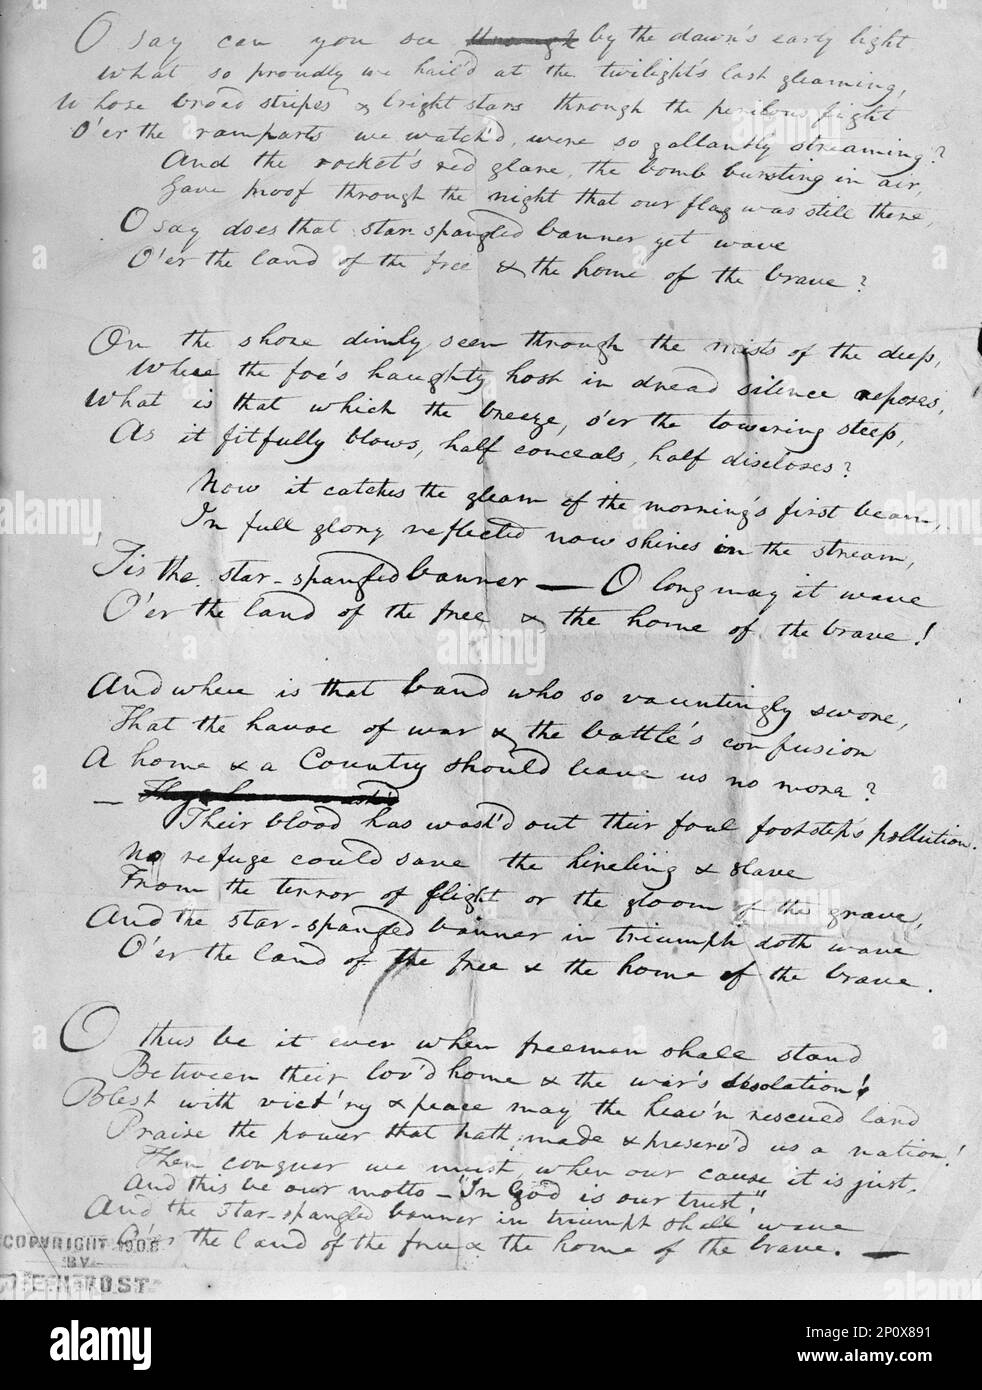 Francis Scott Key, Original Manuscript of 'Star Spangled Banner', 1914. US lawyer, author and poet Francis Scott Key wrote the lyrics for &quot;The Star-Spangled Banner&quot;. Stock Photo